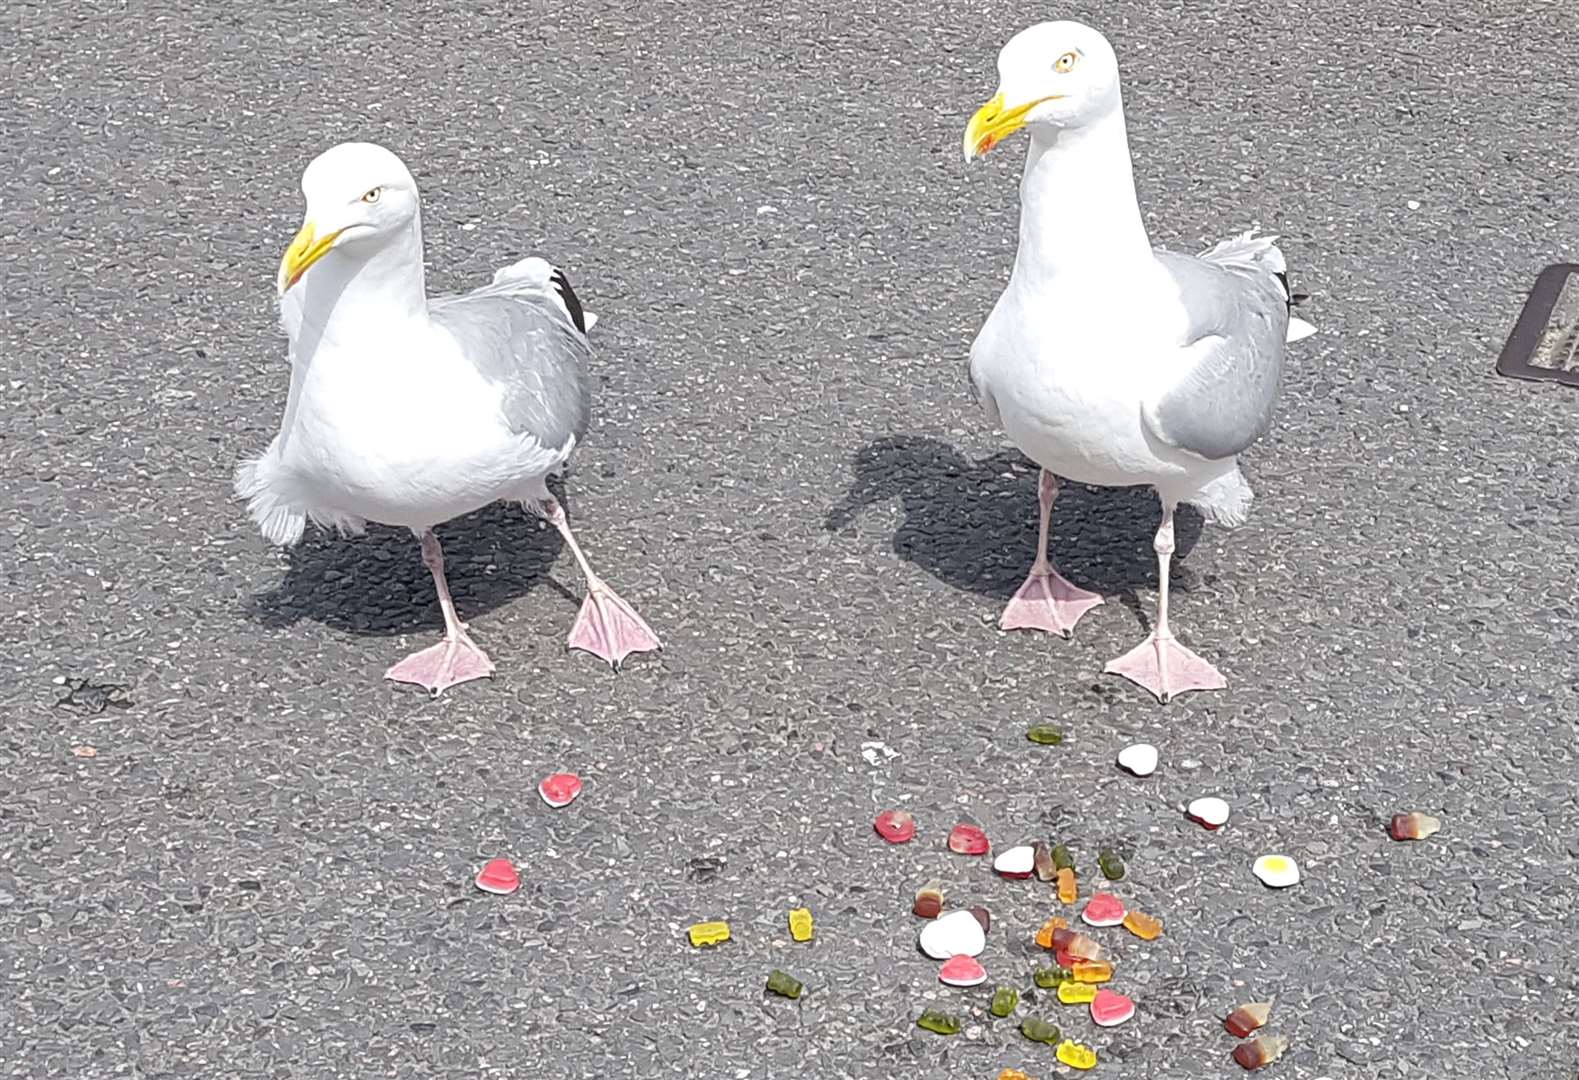 New research says staring at seagulls will make them less likely to steal your food. Picture: Kathryn Hewitt